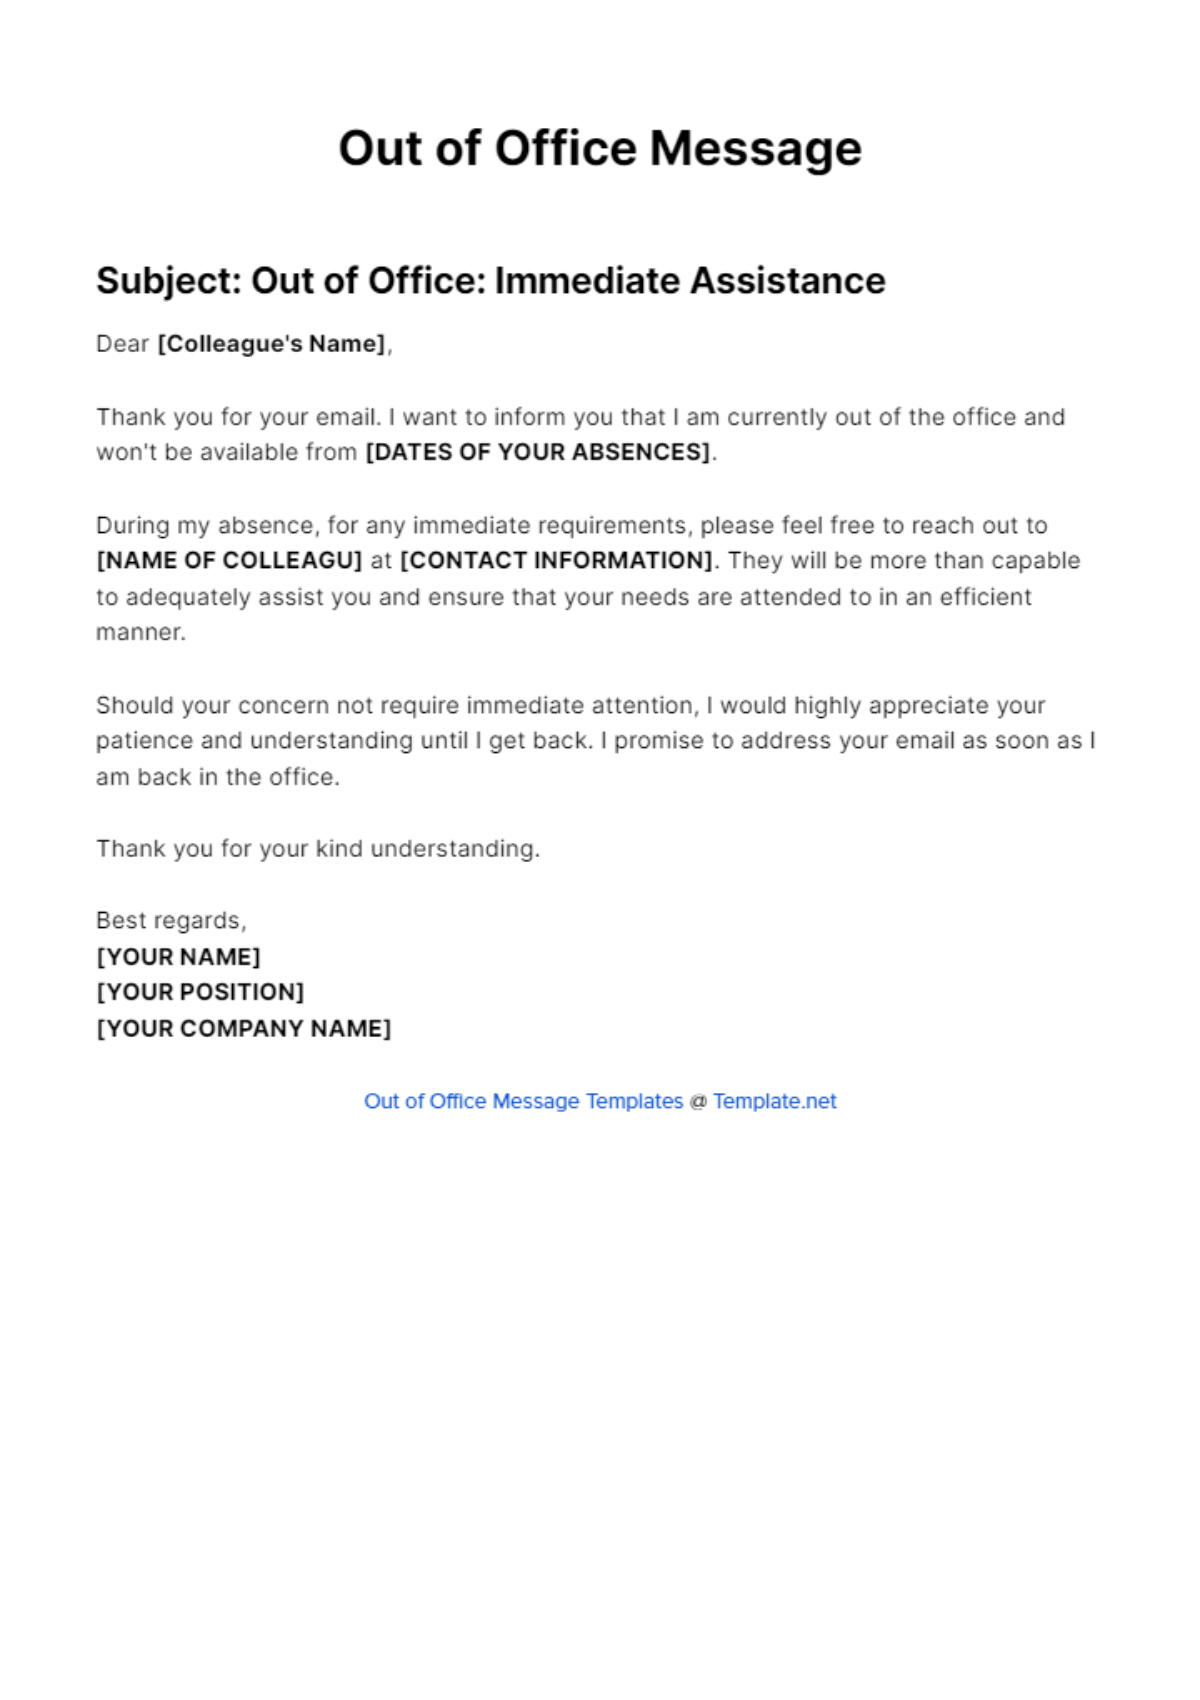 Out Of Office Message For Immediate Assistance Template